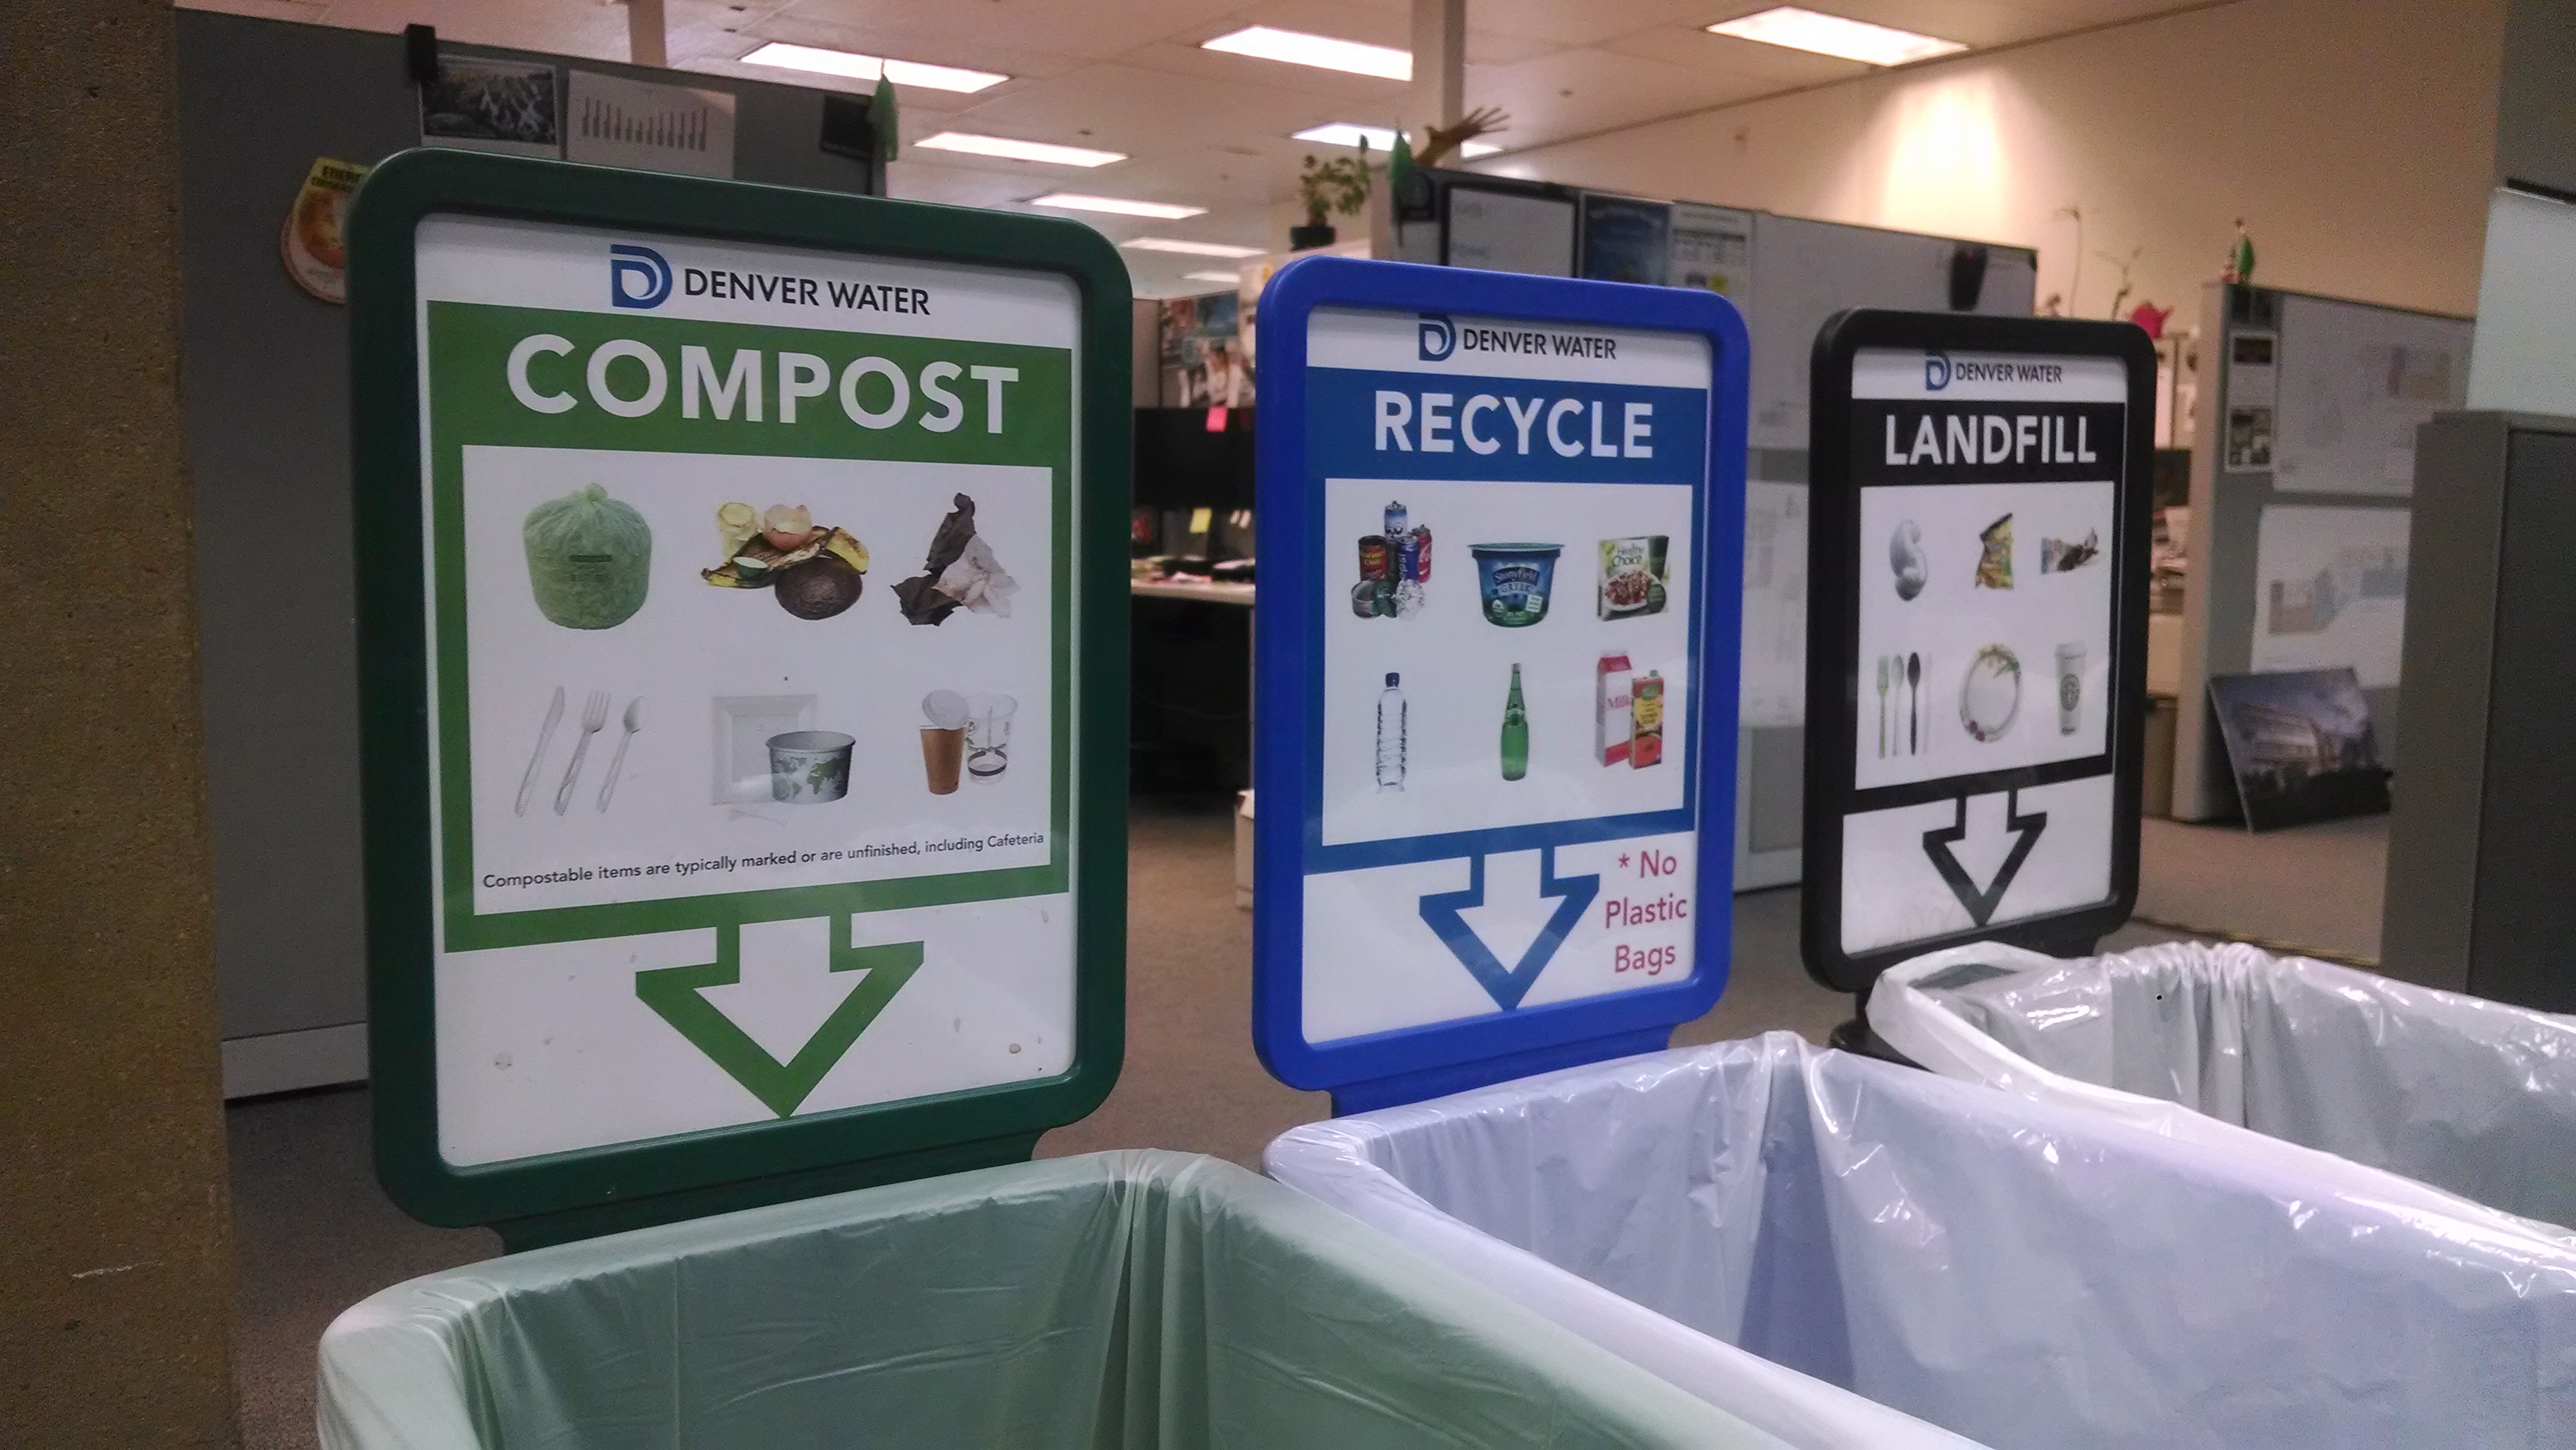 Not all trash is the same. Denver Water employees can sort their trash for composting, recycling or the landfill.